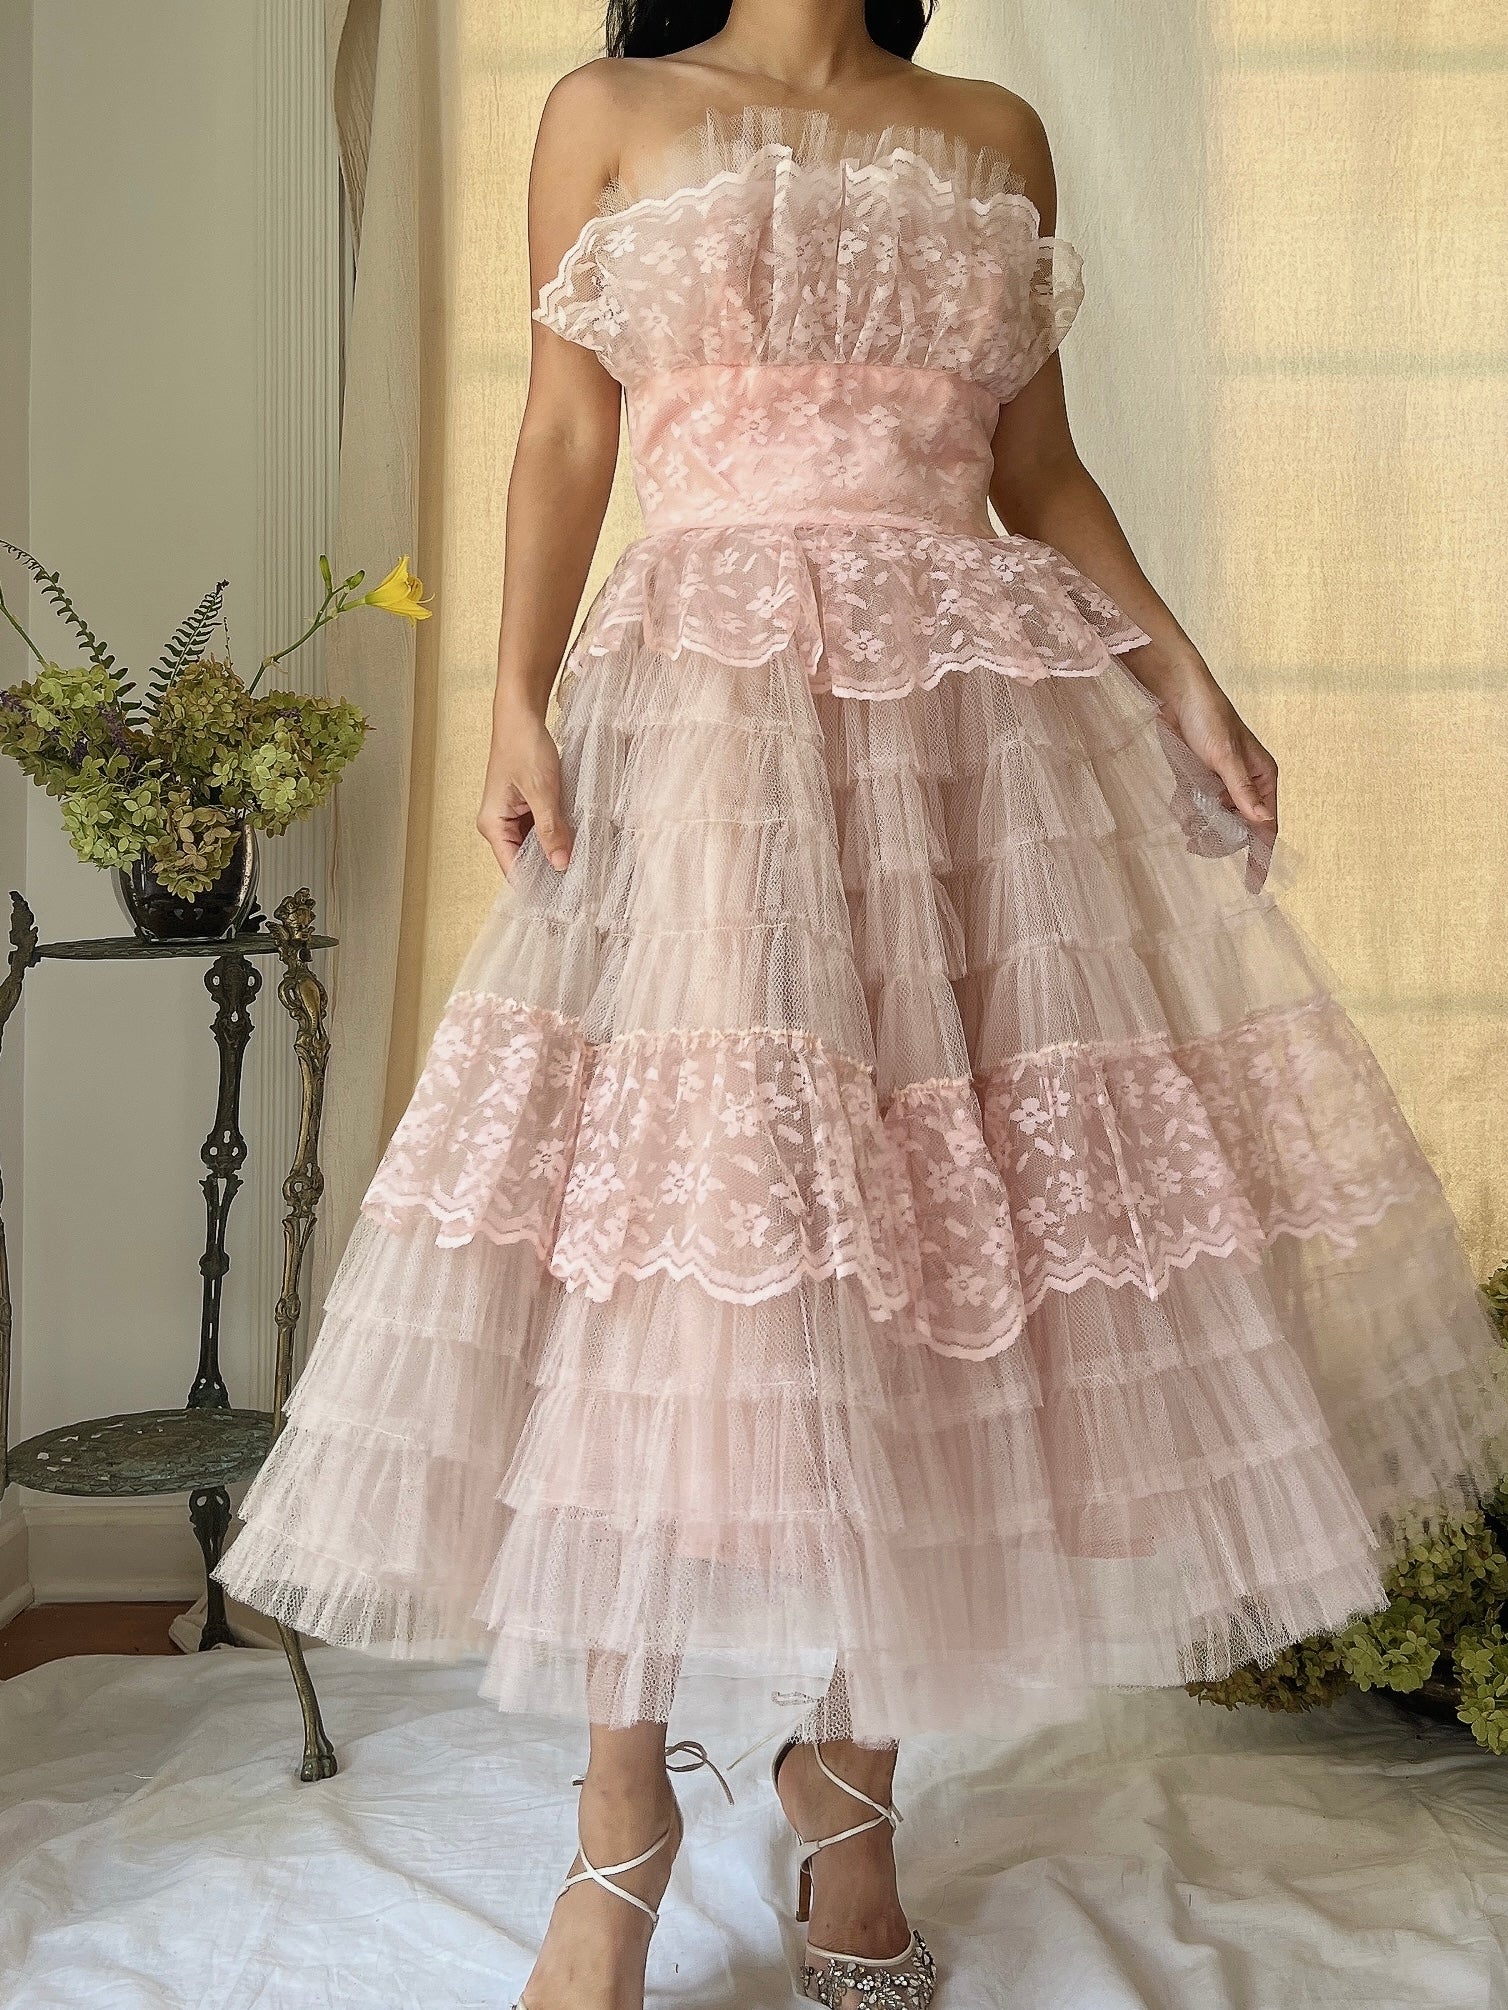 1950s Pink Tulle Dress - XS